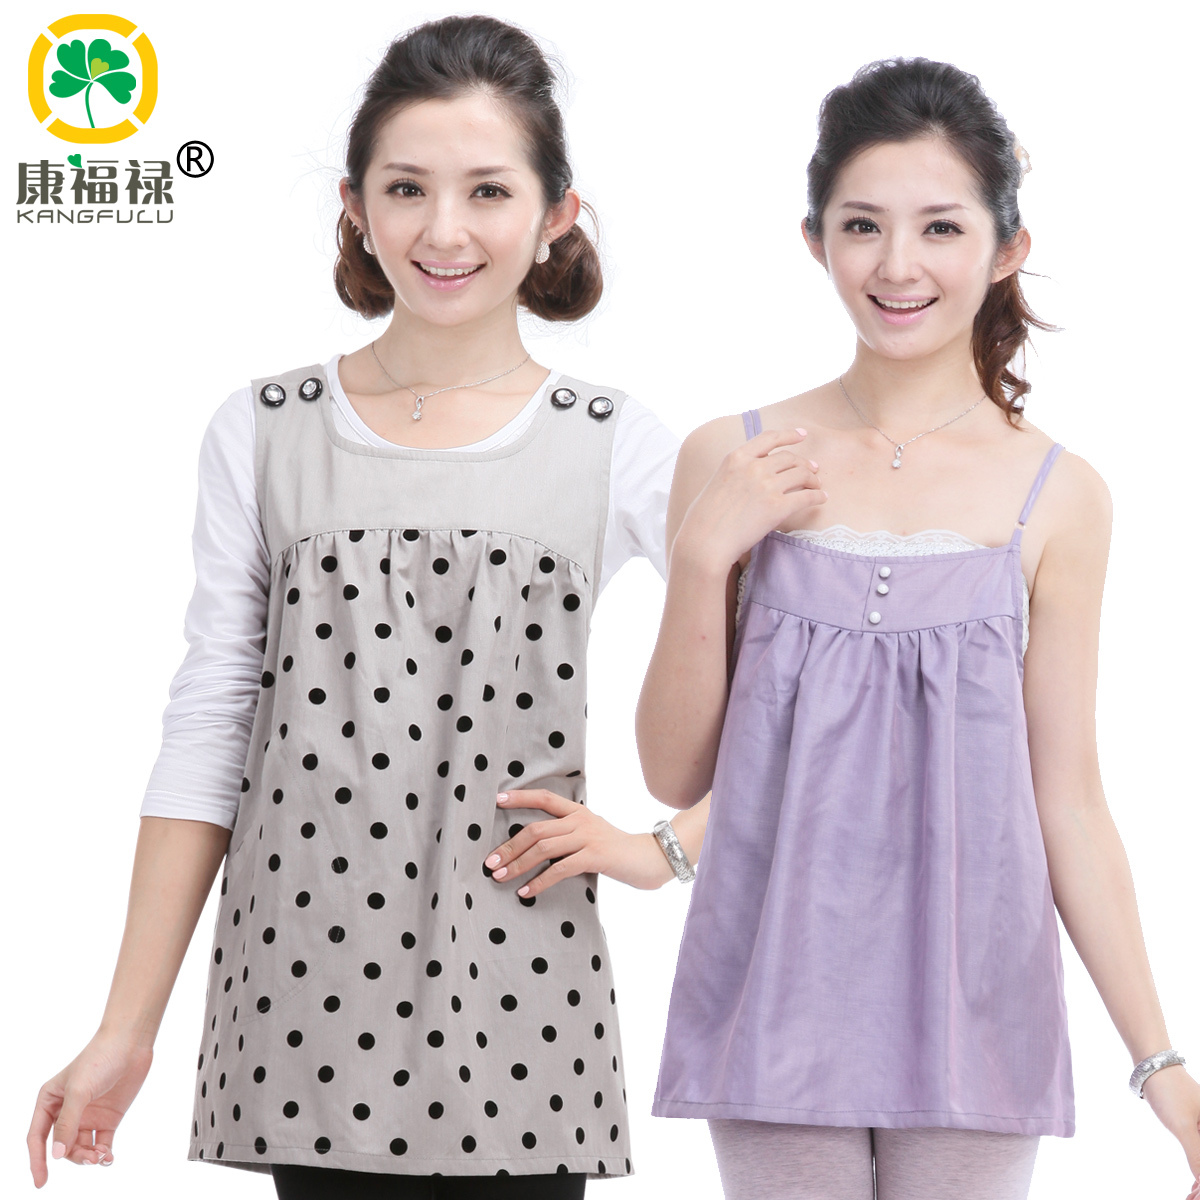 Radiation-resistant maternity clothing silver fiber spaghetti strap radiation-resistant maternity clothes kfl801y205